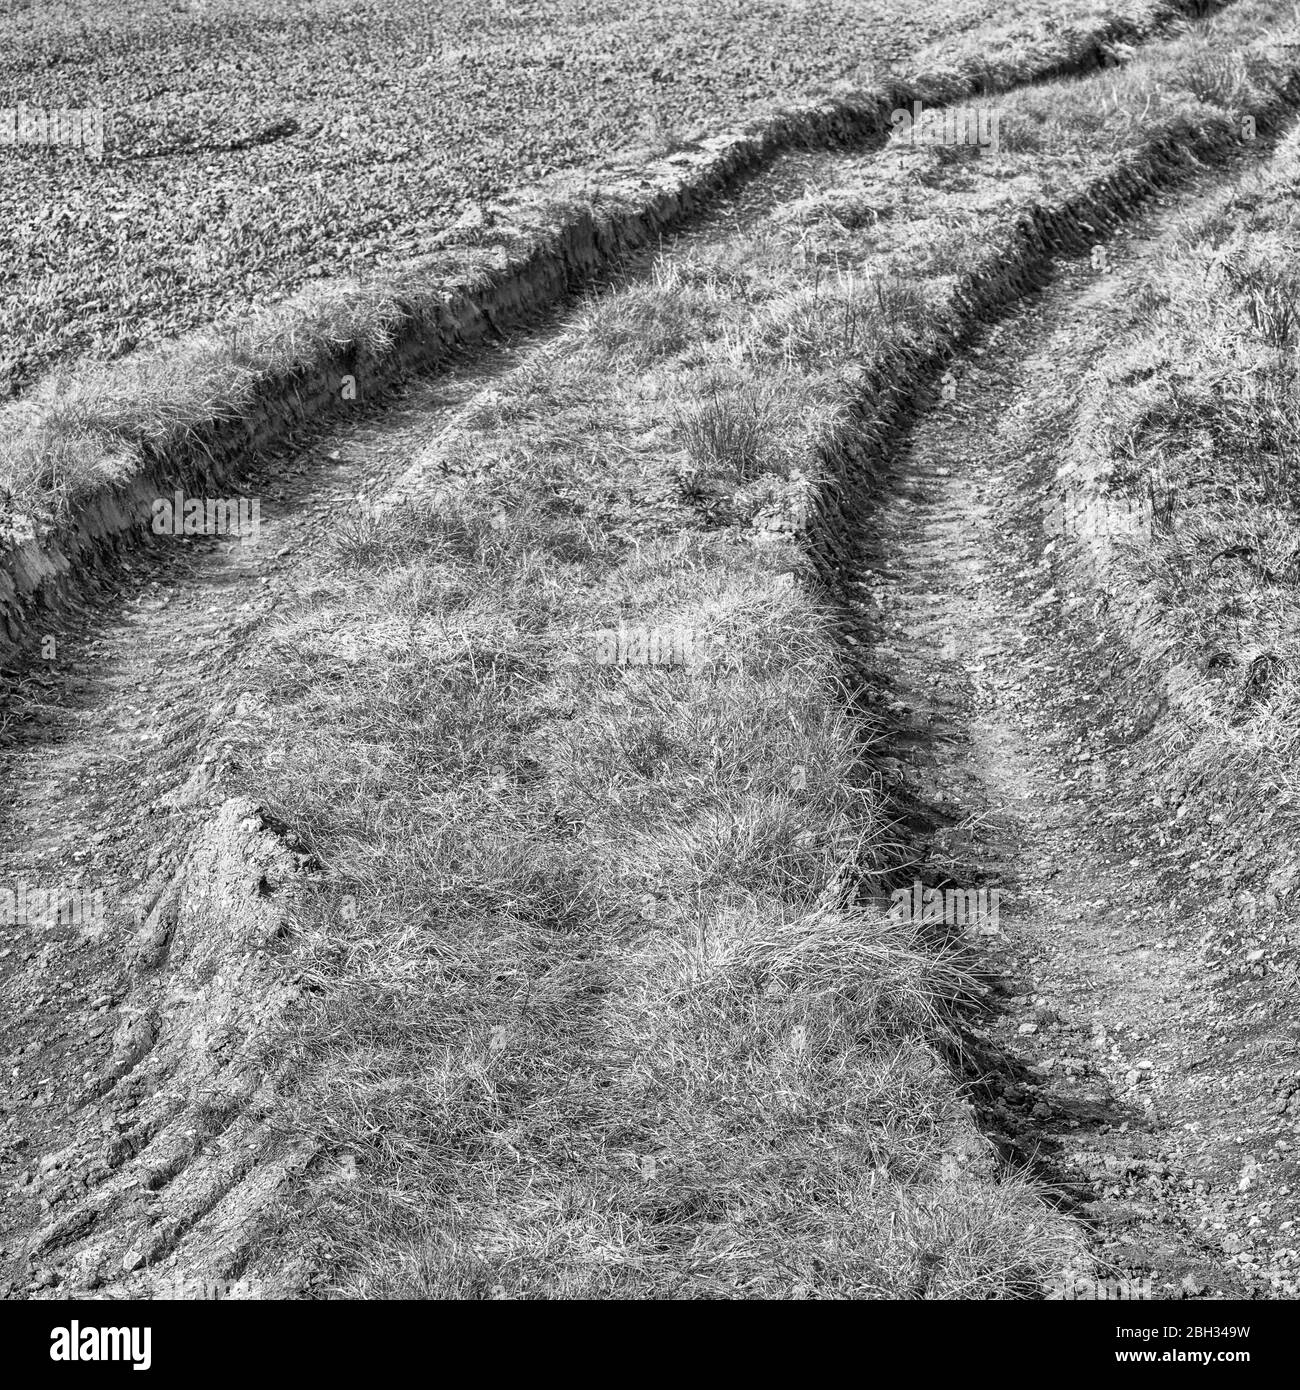 Black and white monochrome tractor tyre tracks scurving into the distance. Metaphor in a rut, leaving a deep impression, changing course. Stock Photo